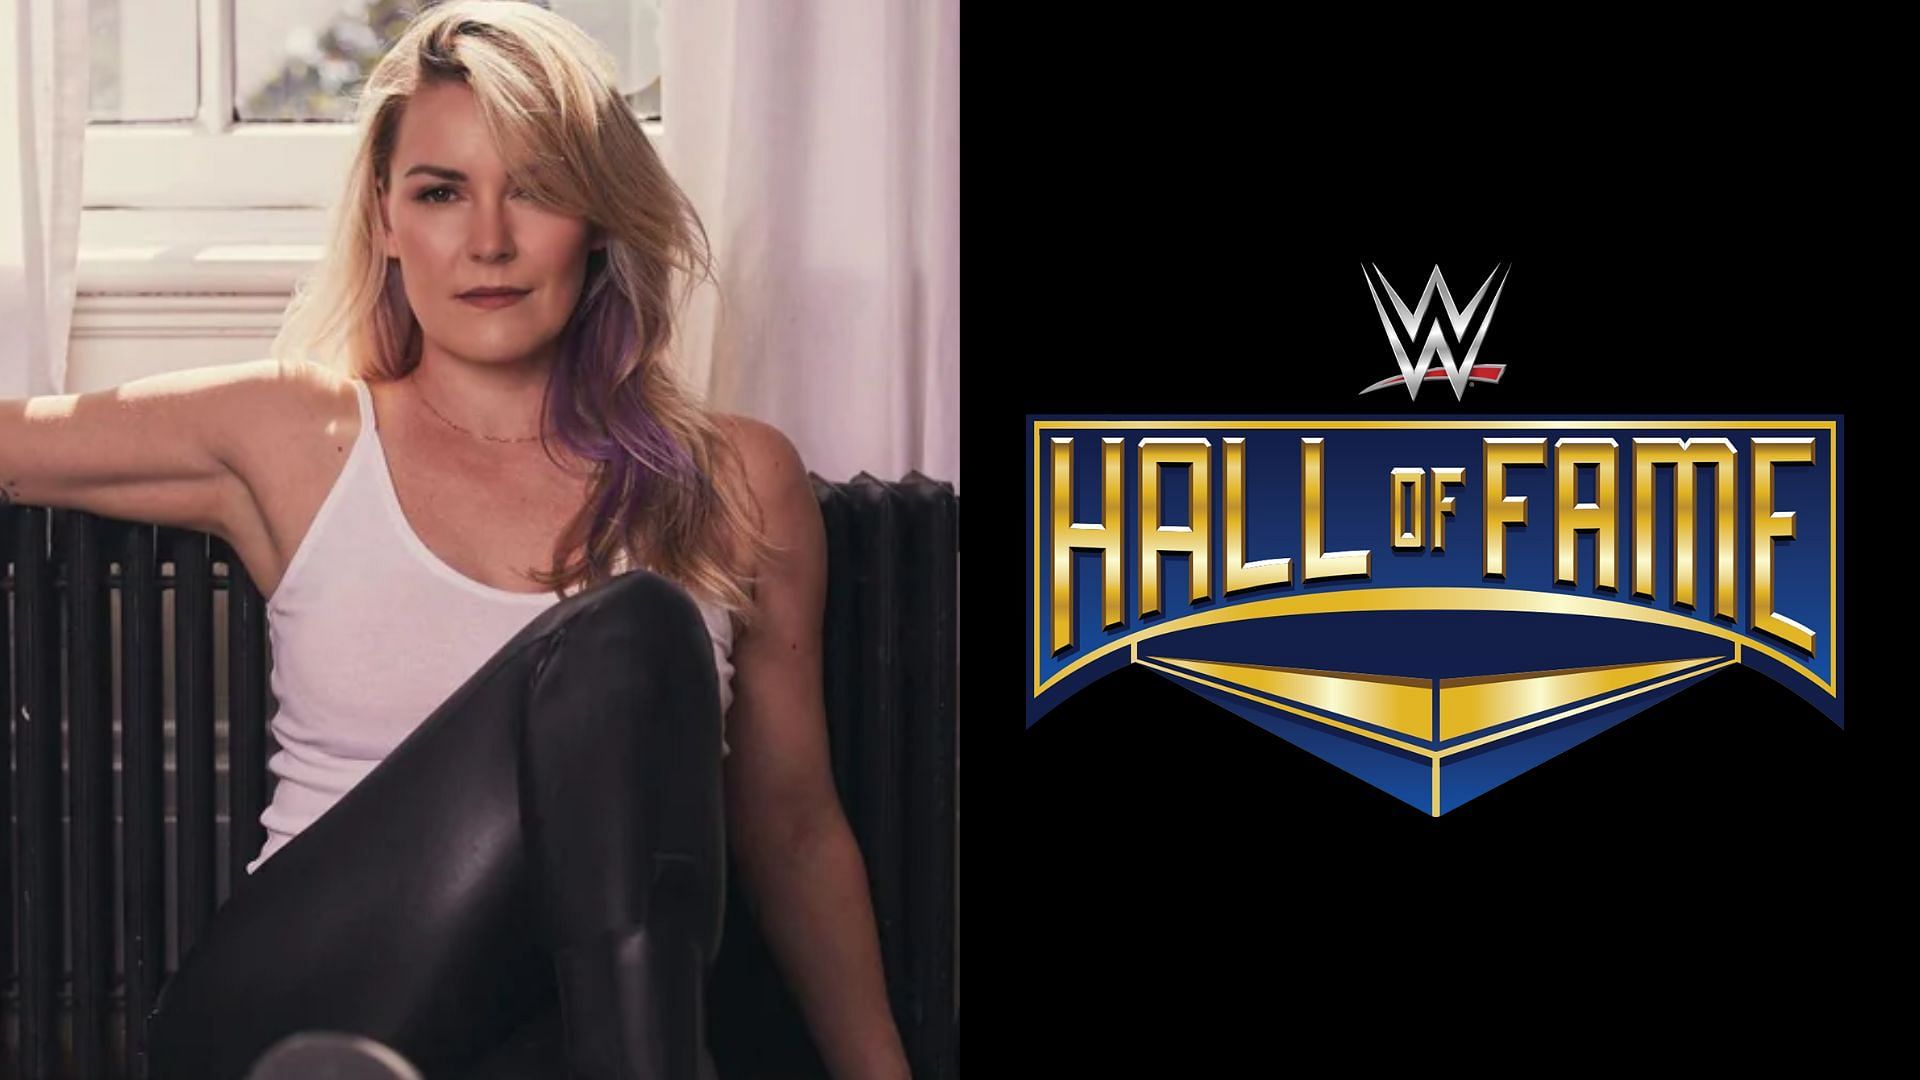 Could Renee Paquette someday surpass this WWE Hall of Famer?